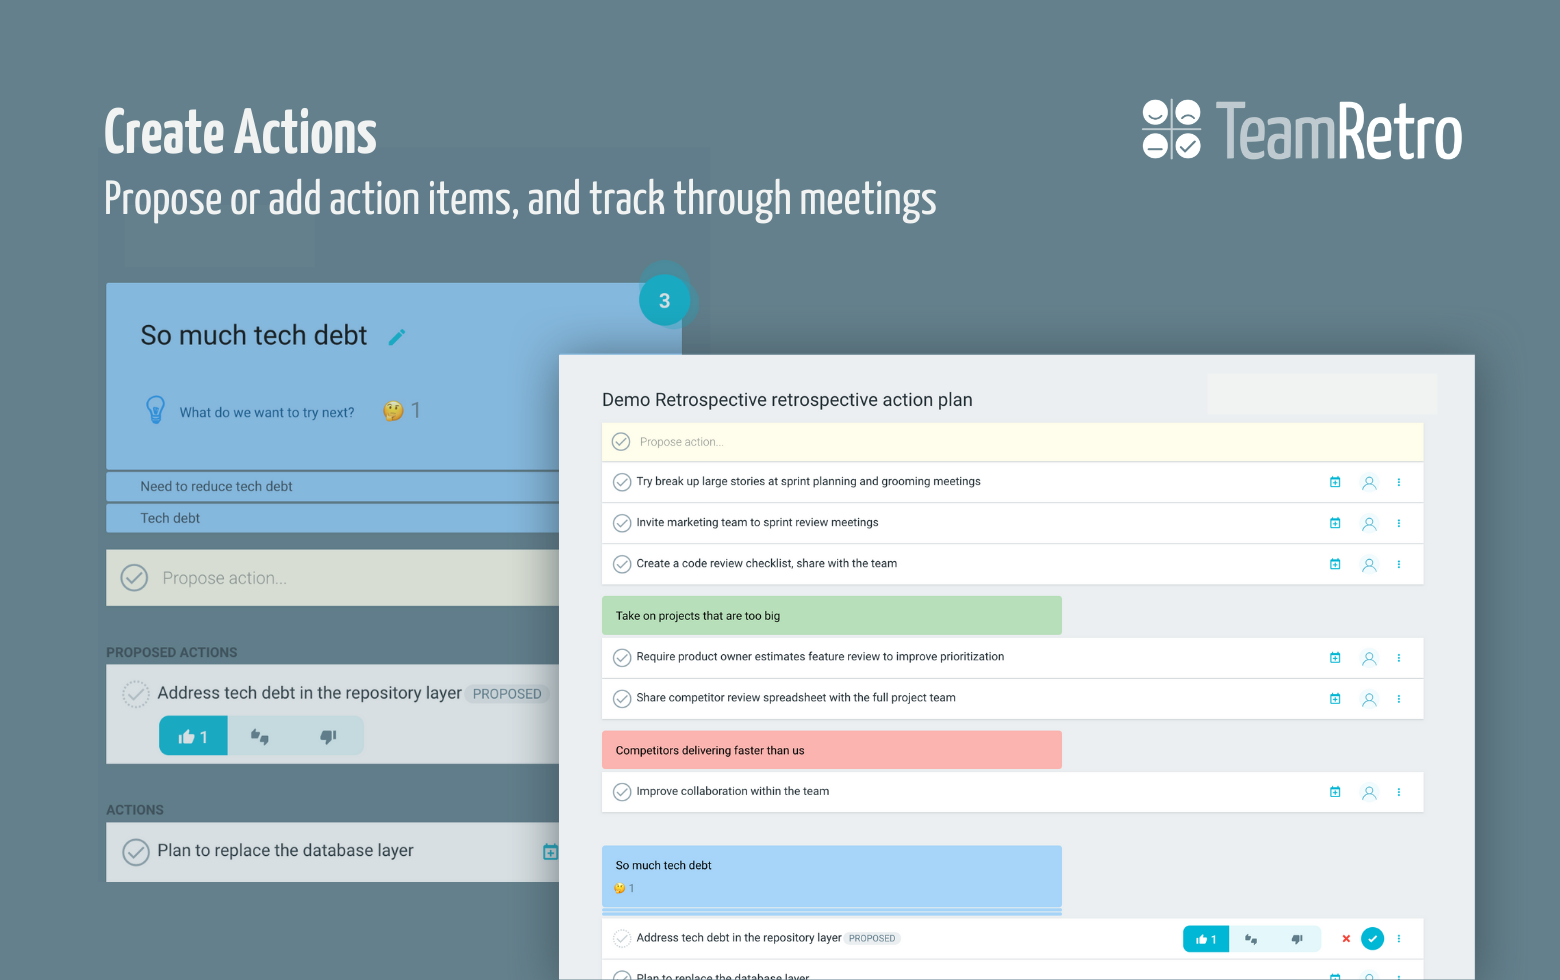 Create and review actions, assign to owners and set due dates. Track actions between retrospectives. Share the results via email, slack or import into the tool of your choice.